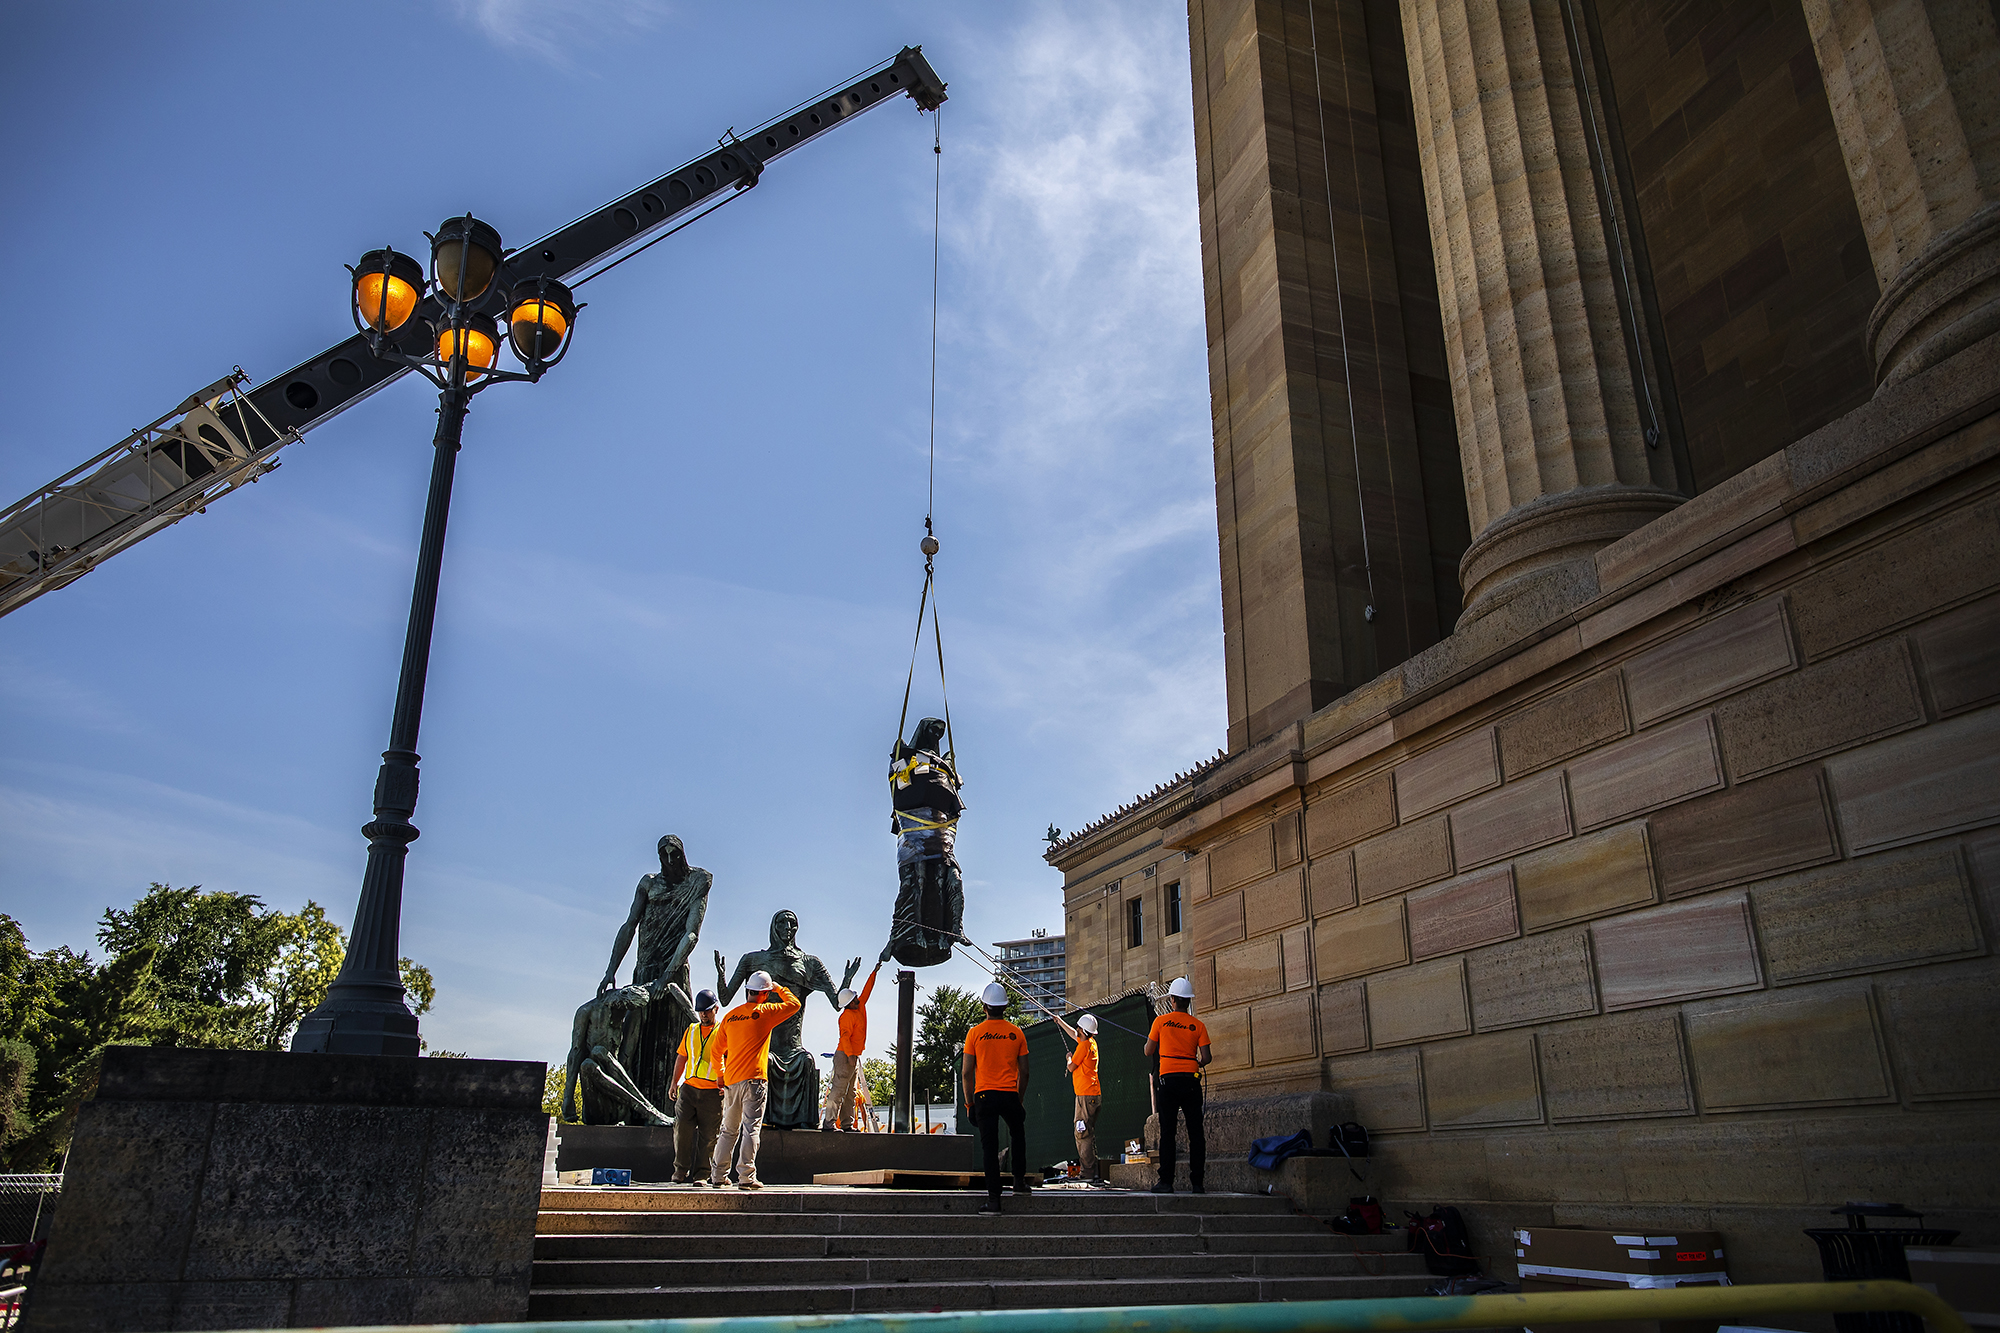 View of sculpture with three sets of figures and one on right is being lifted with a large crane. Several construction workers with hardhats are standing around it, at the top of steps next to a large stone building with columns.